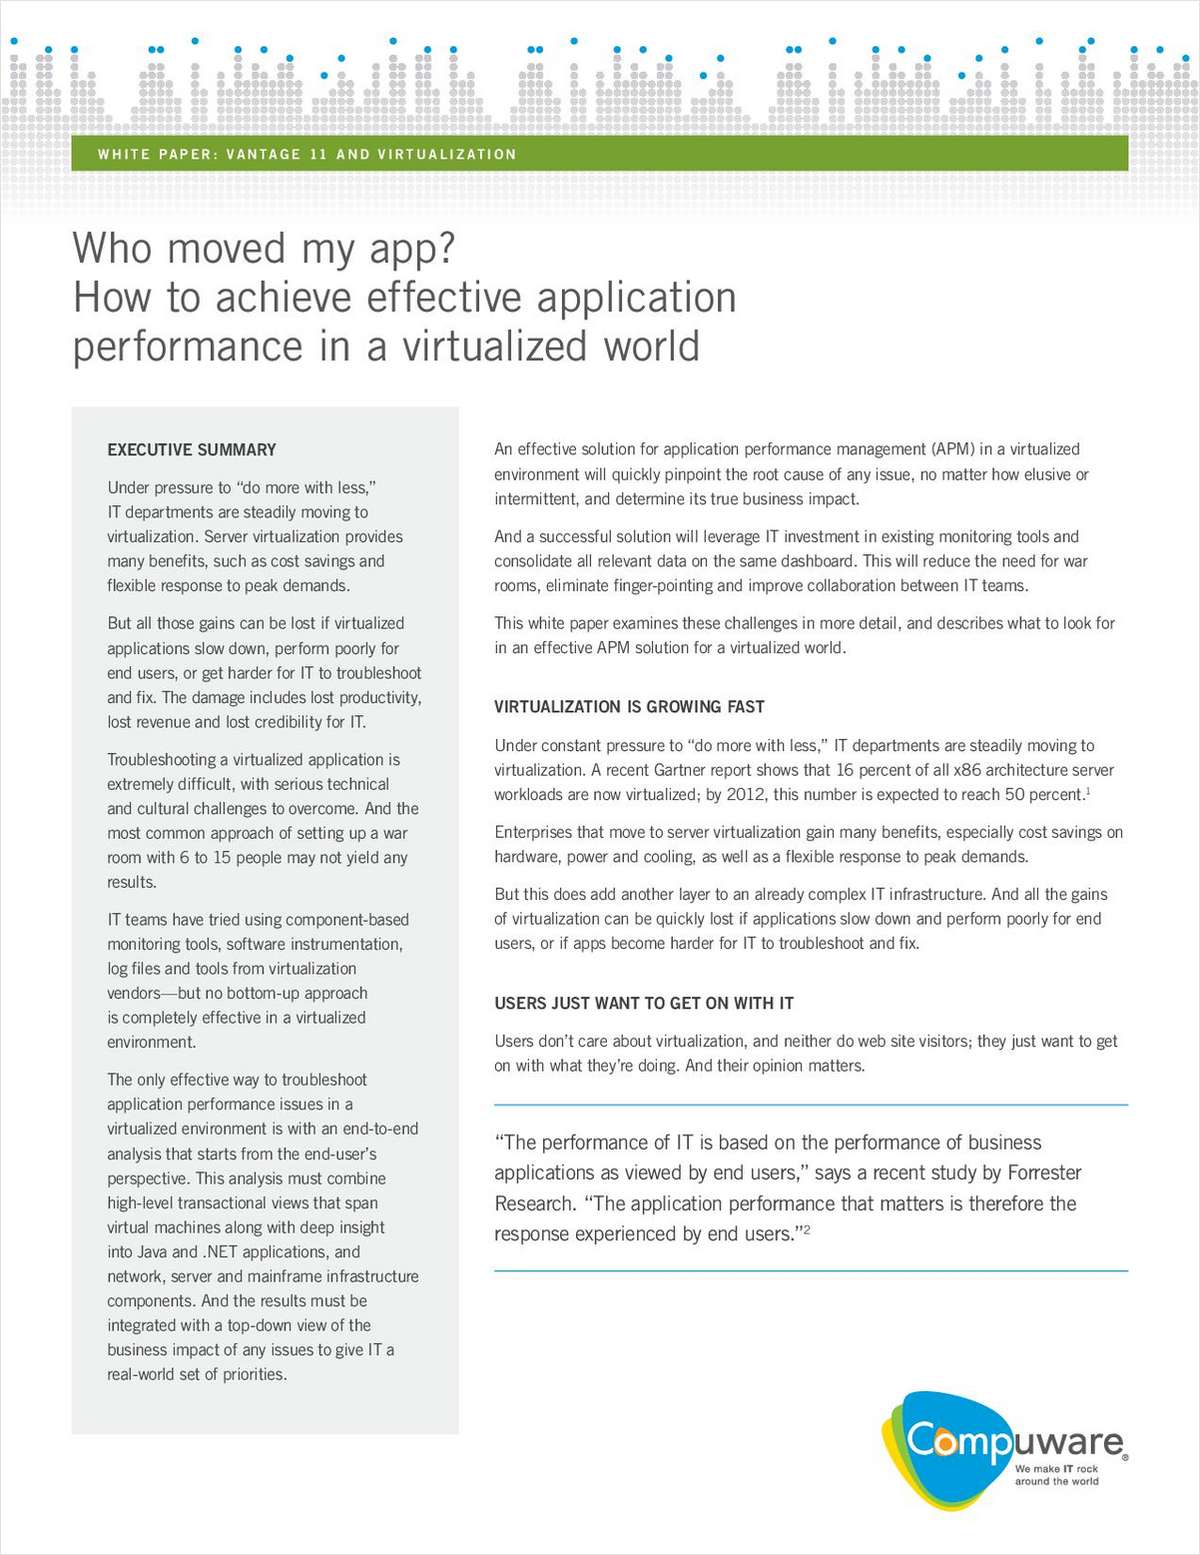 Who Moved My App? How to Achieve Effective Application Performance in a Virtualized World